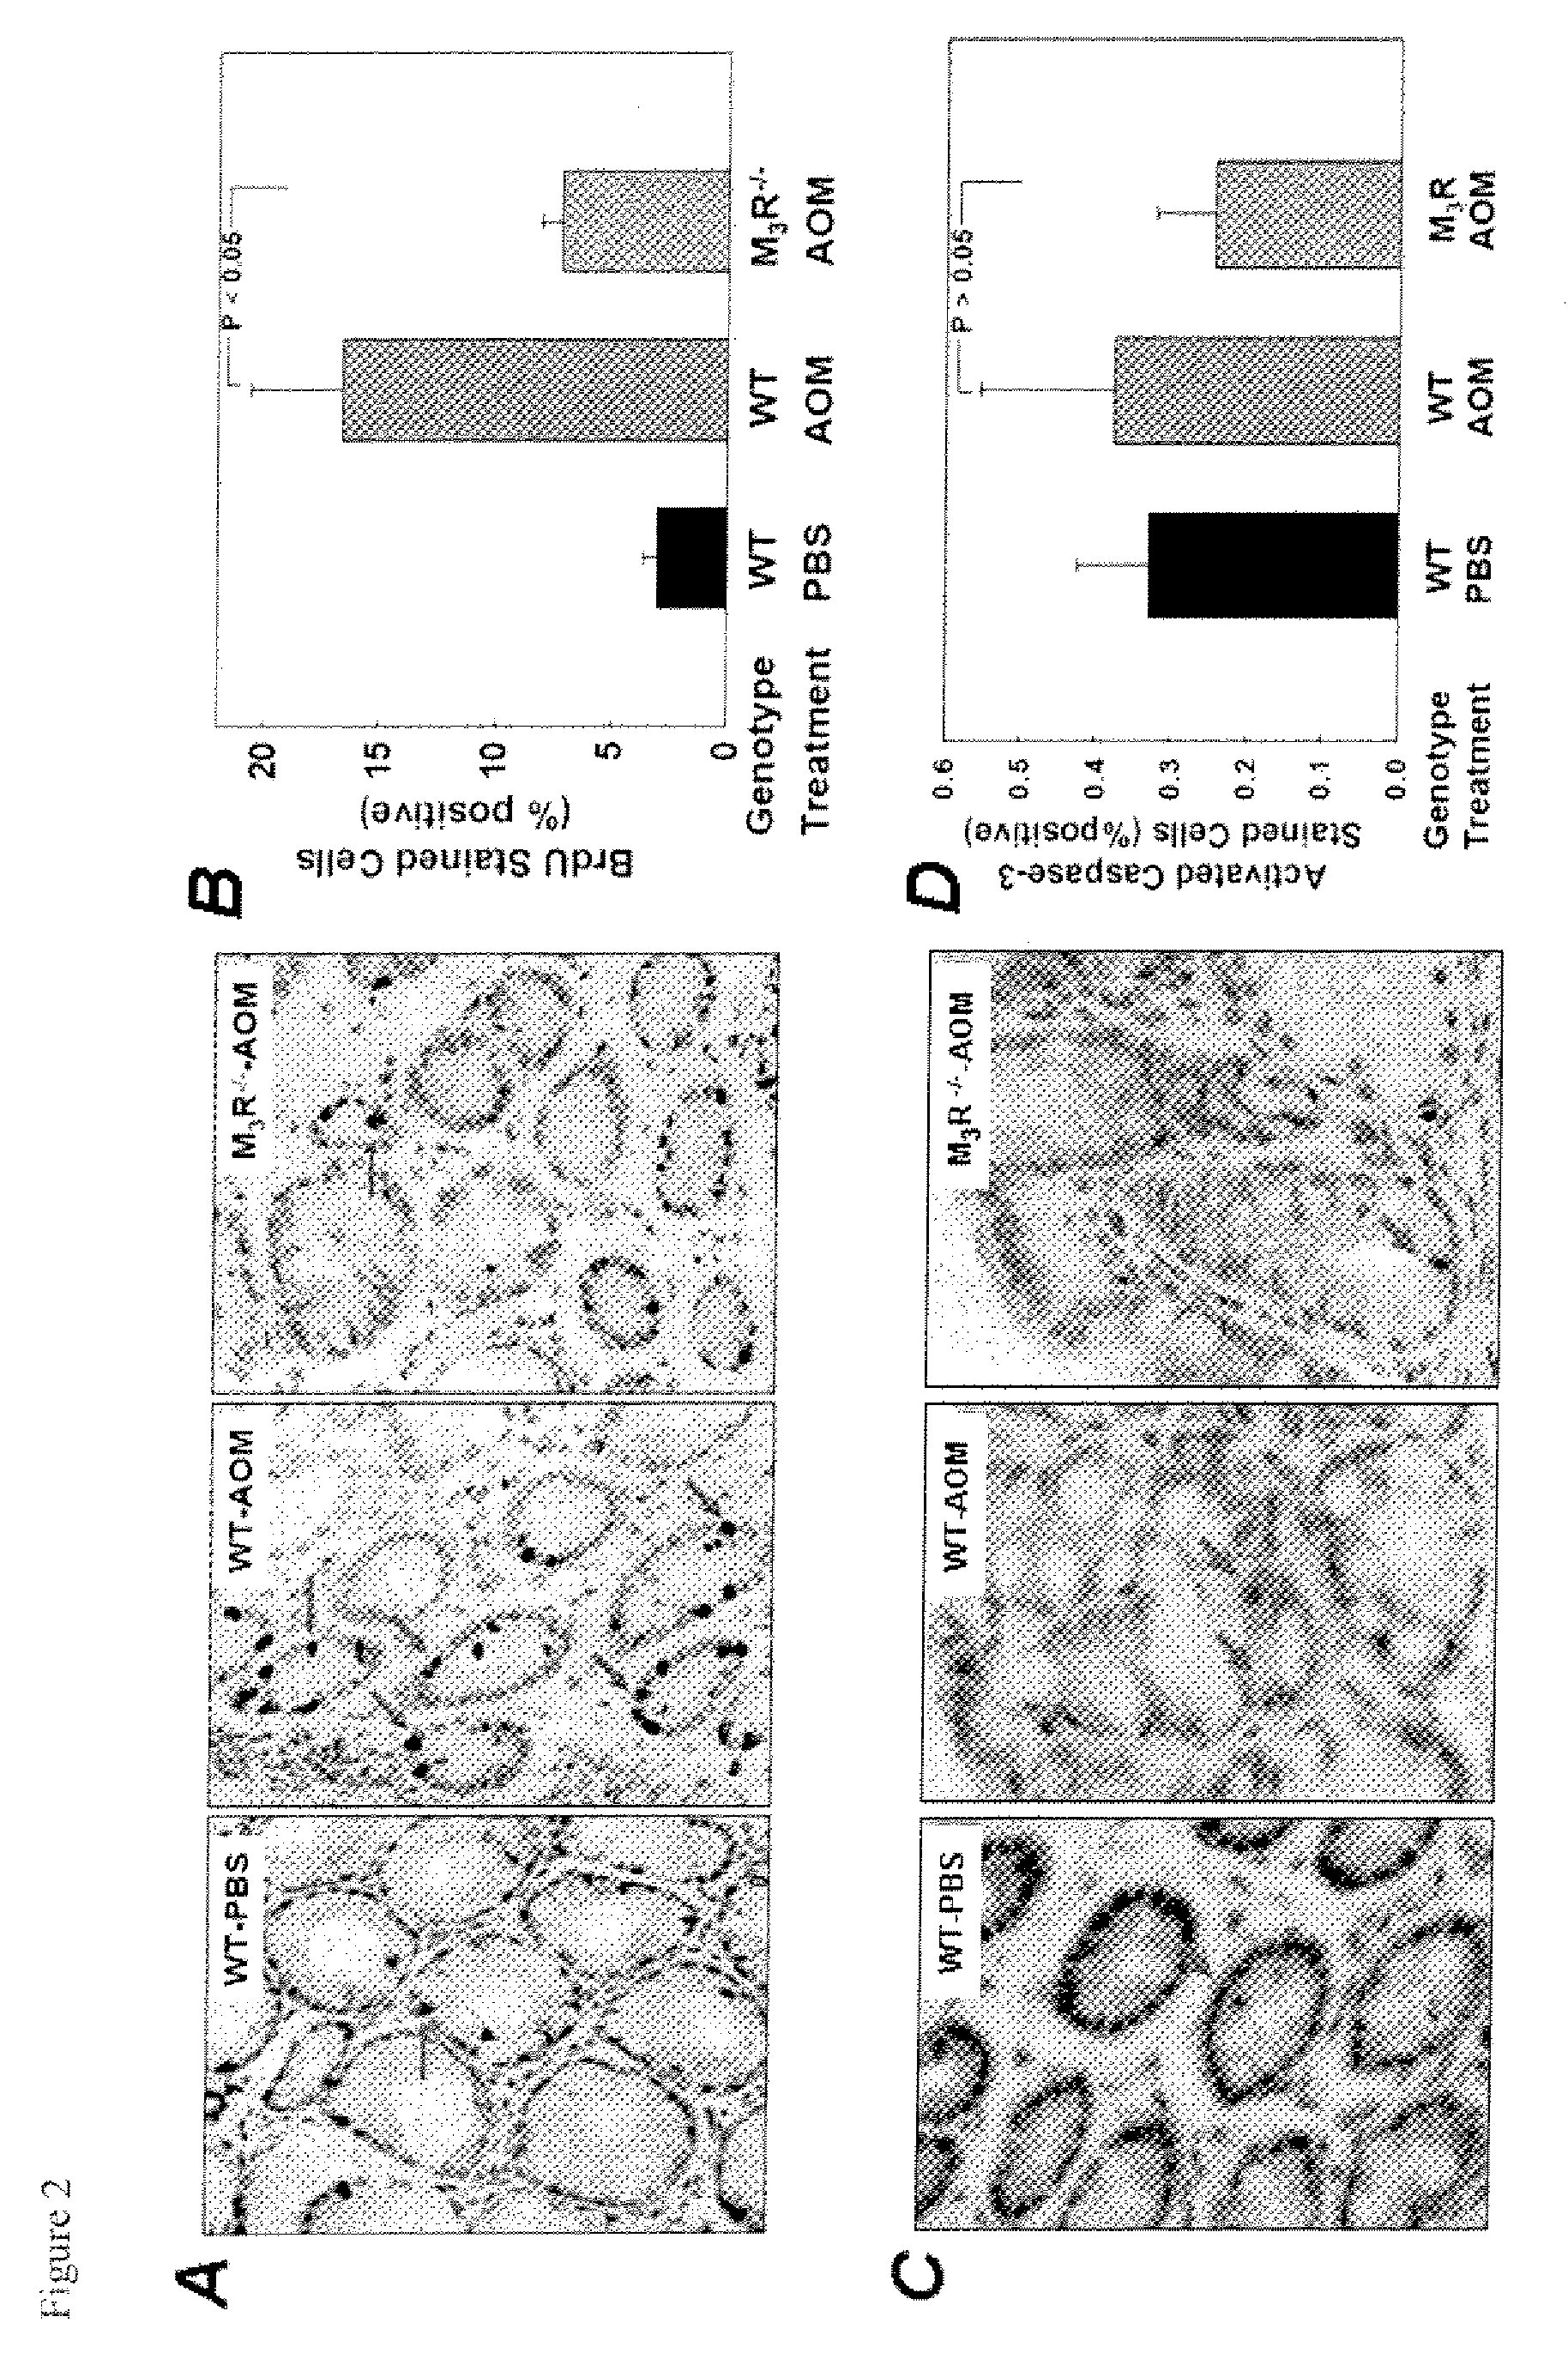 Treatment of cancer with Anti-muscarinic receptor agents